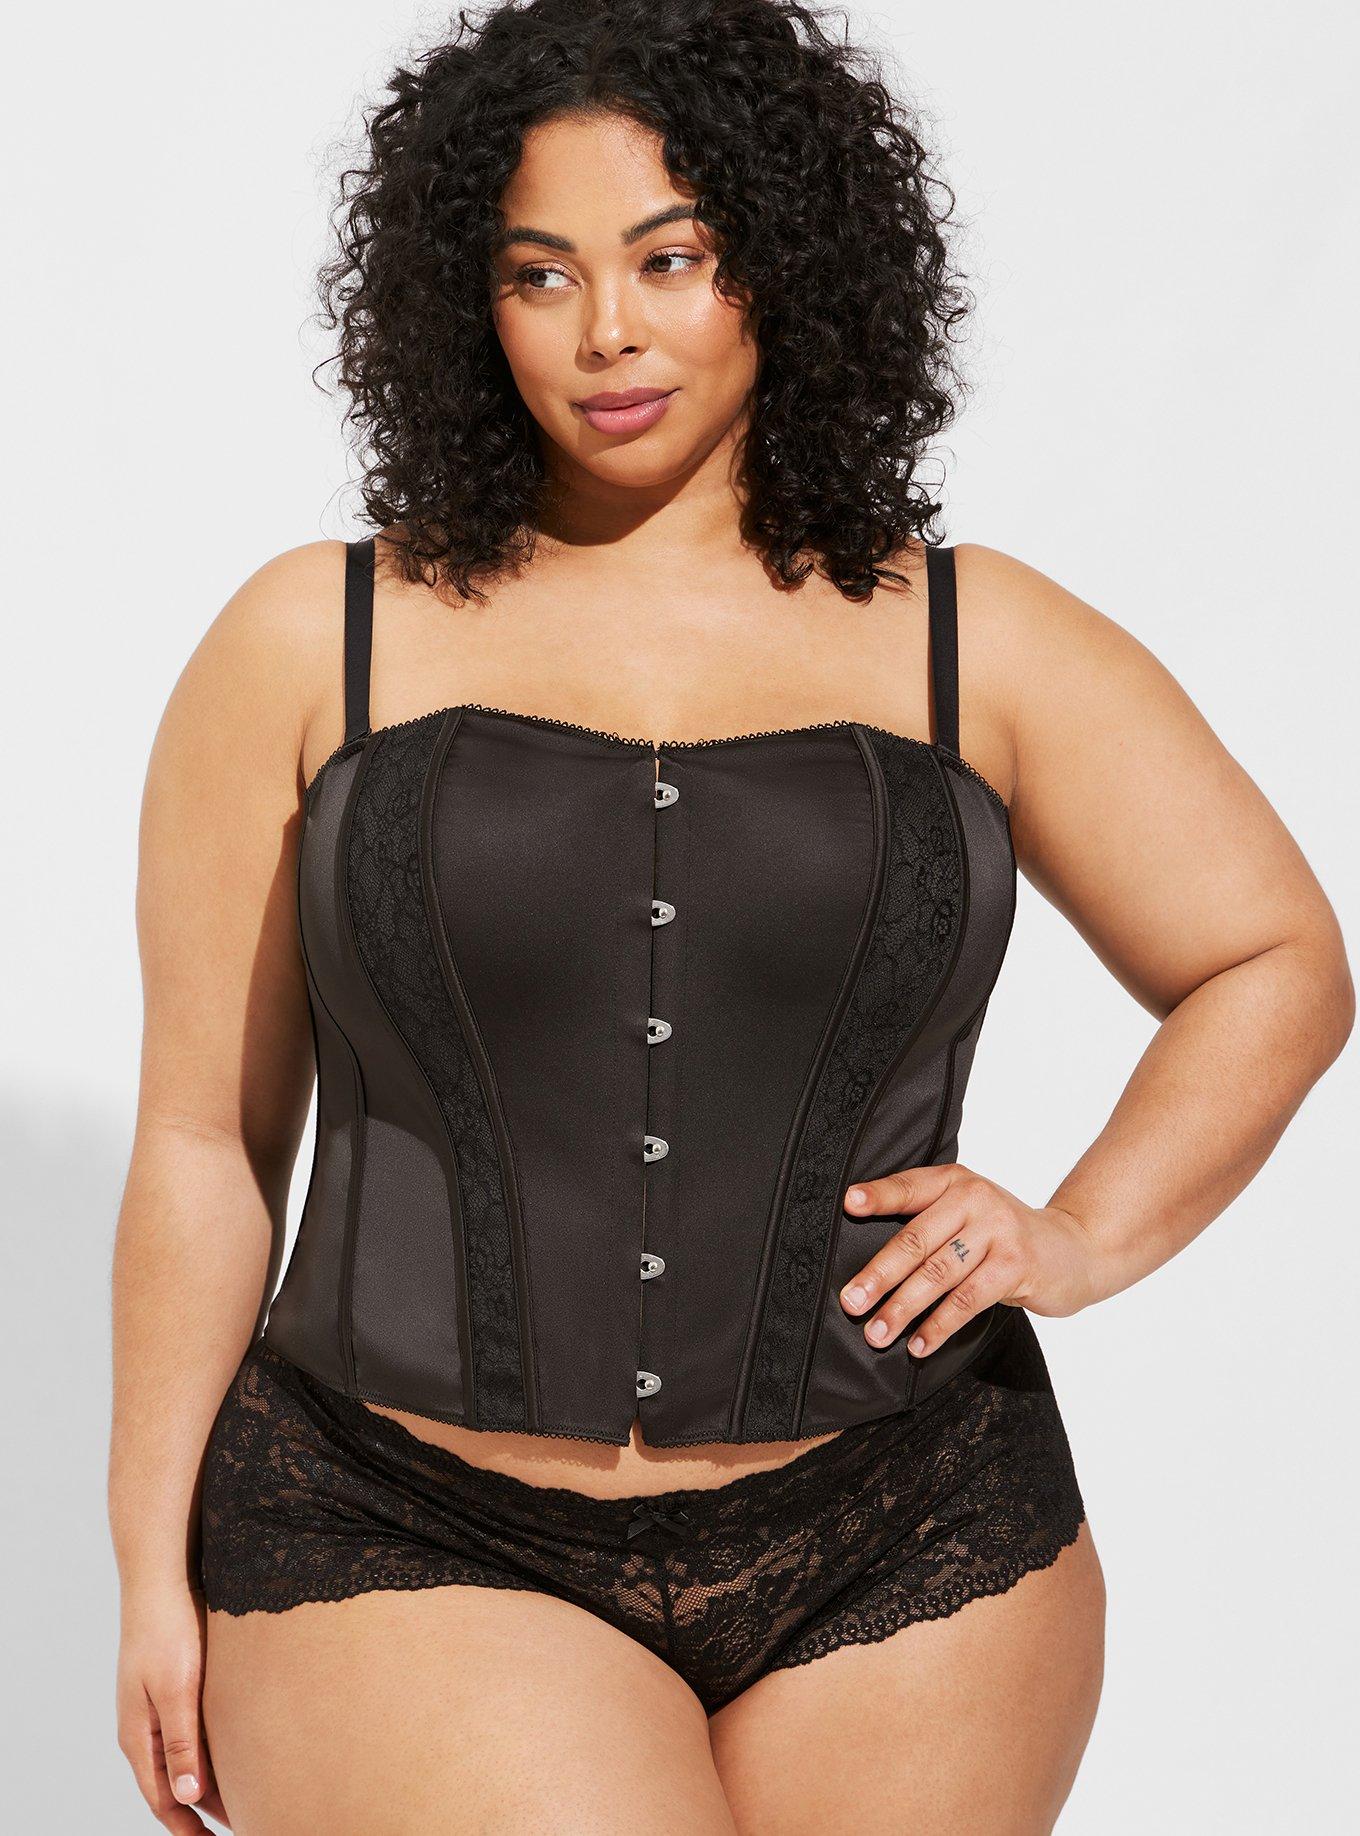 Plus Size - Satin And Lace High Neck Bra Top - Torrid